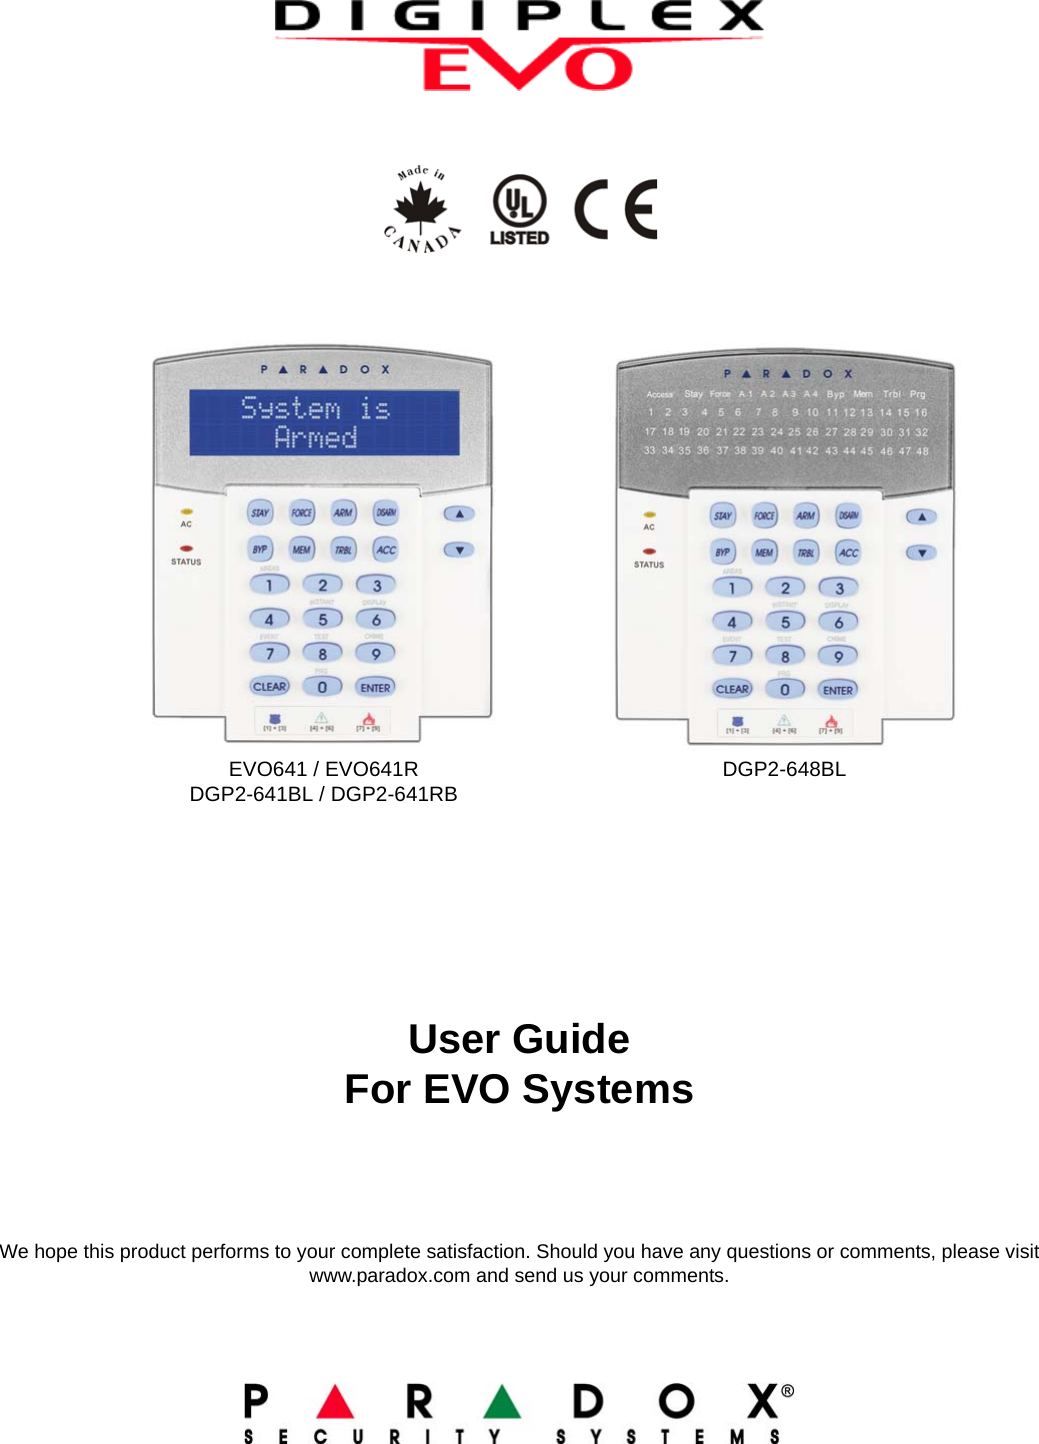 User GuideFor EVO SystemsWe hope this product performs to your complete satisfaction. Should you have any questions or comments, please visit www.paradox.com and send us your comments.EVO641 / EVO641RDGP2-641BL / DGP2-641RB DGP2-648BL